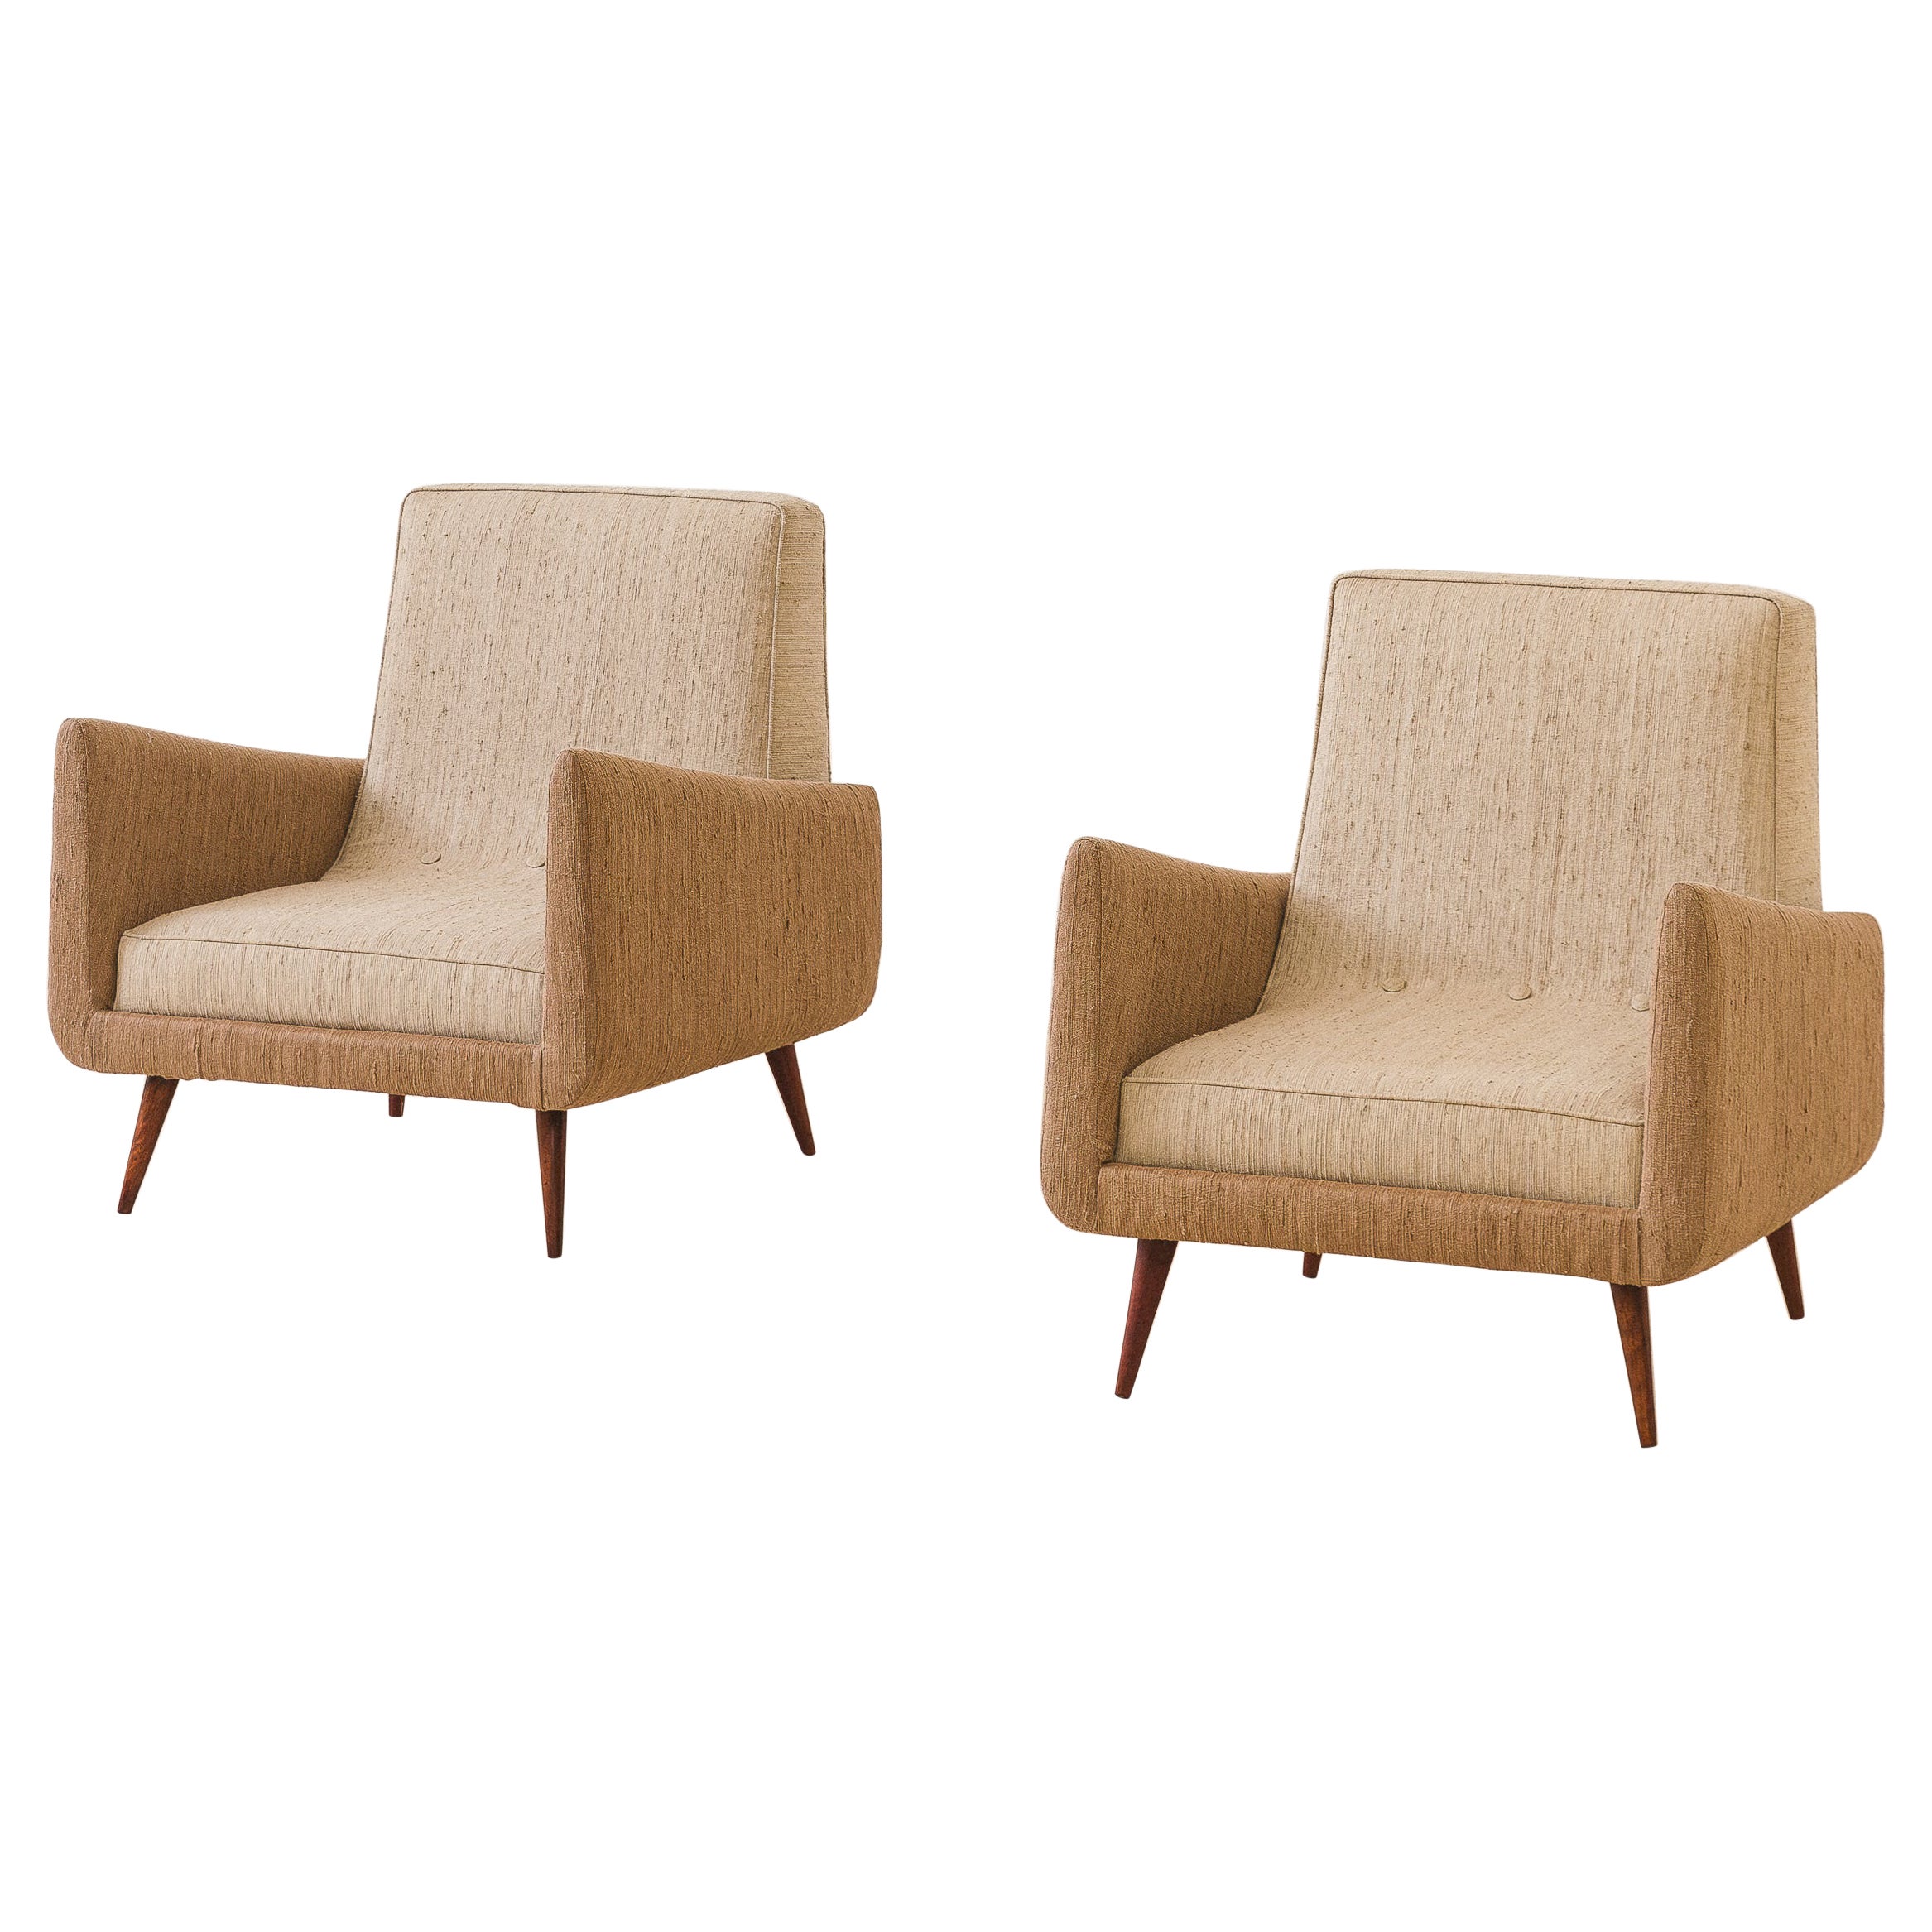 Jorge Zalszupin 801 Armchairs, Rosewood and Fabric, Brazilian MidCentury, 1959 For Sale